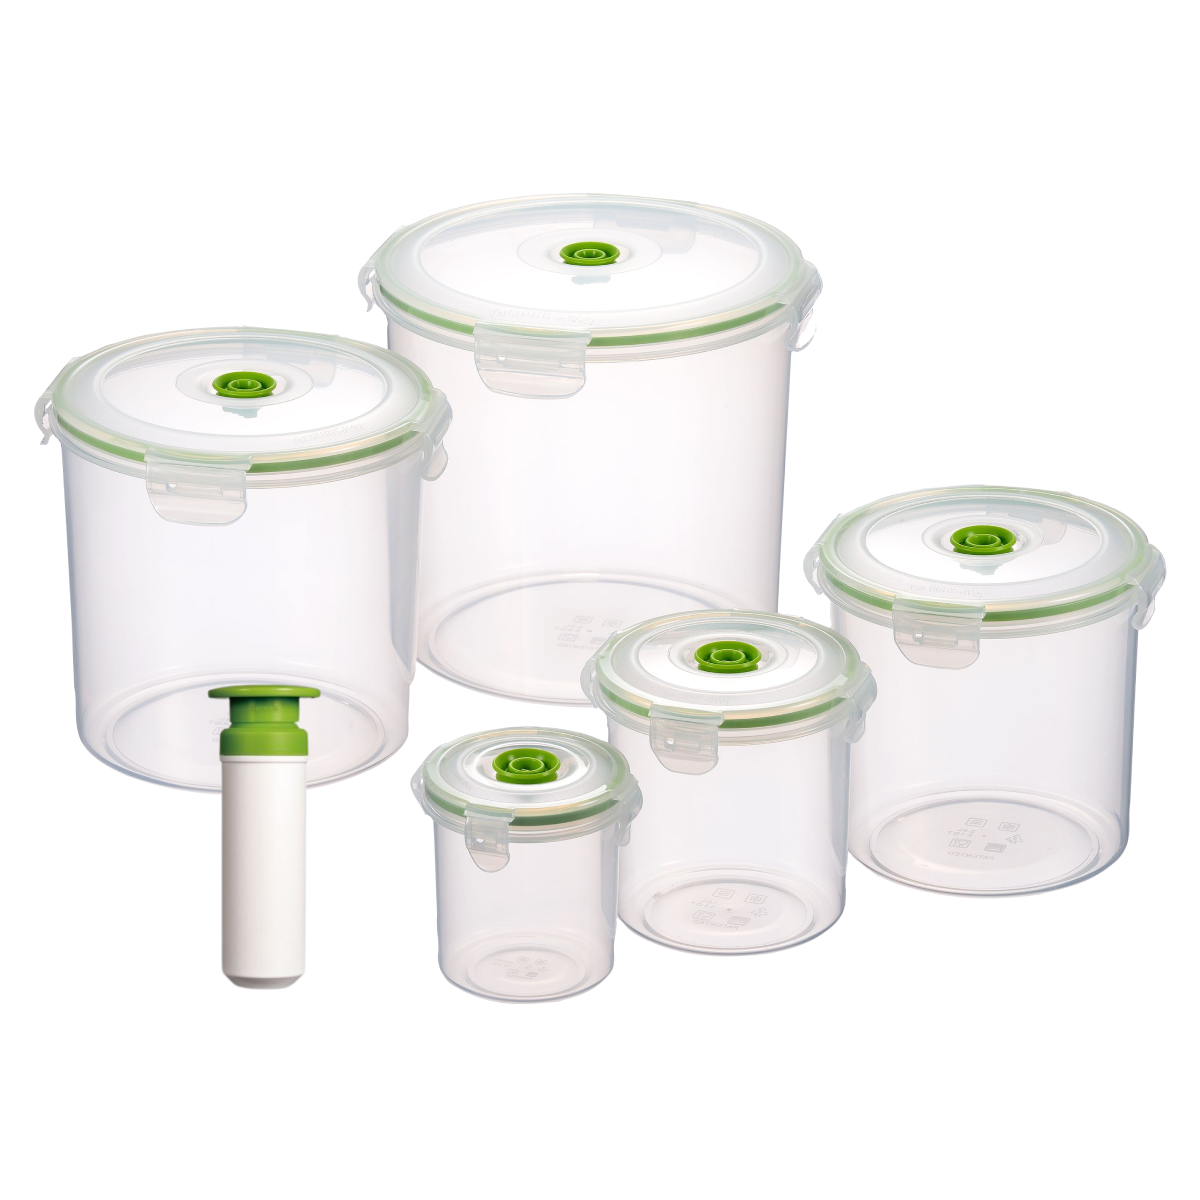 Plastic Cylinder Containers 